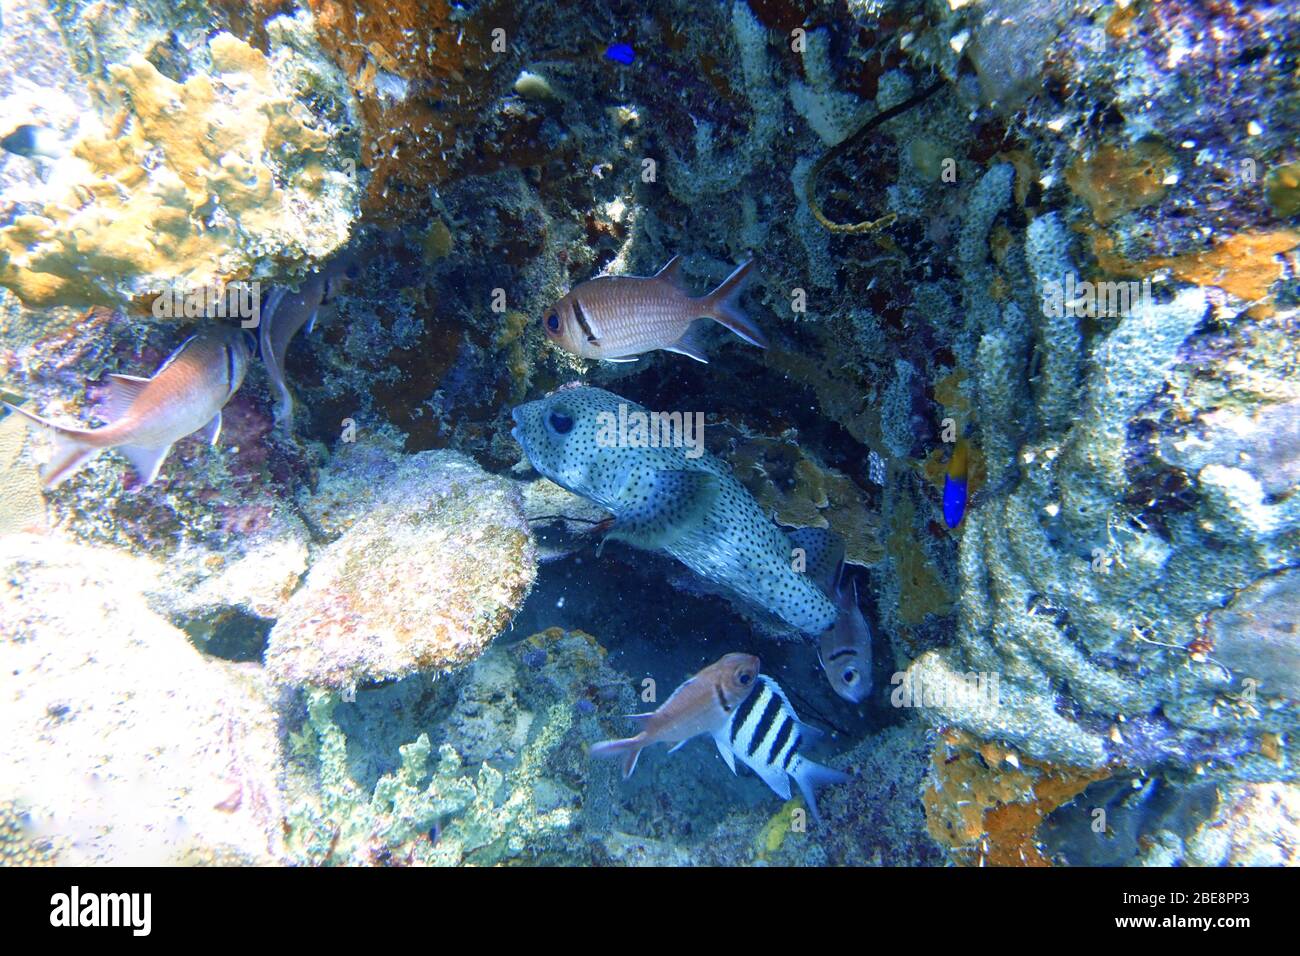 Pufferfish (Tetraodontidae) hiding from predators in between the coral alongside a big eyed squirrelfish (Holocentridae). Stock Photo